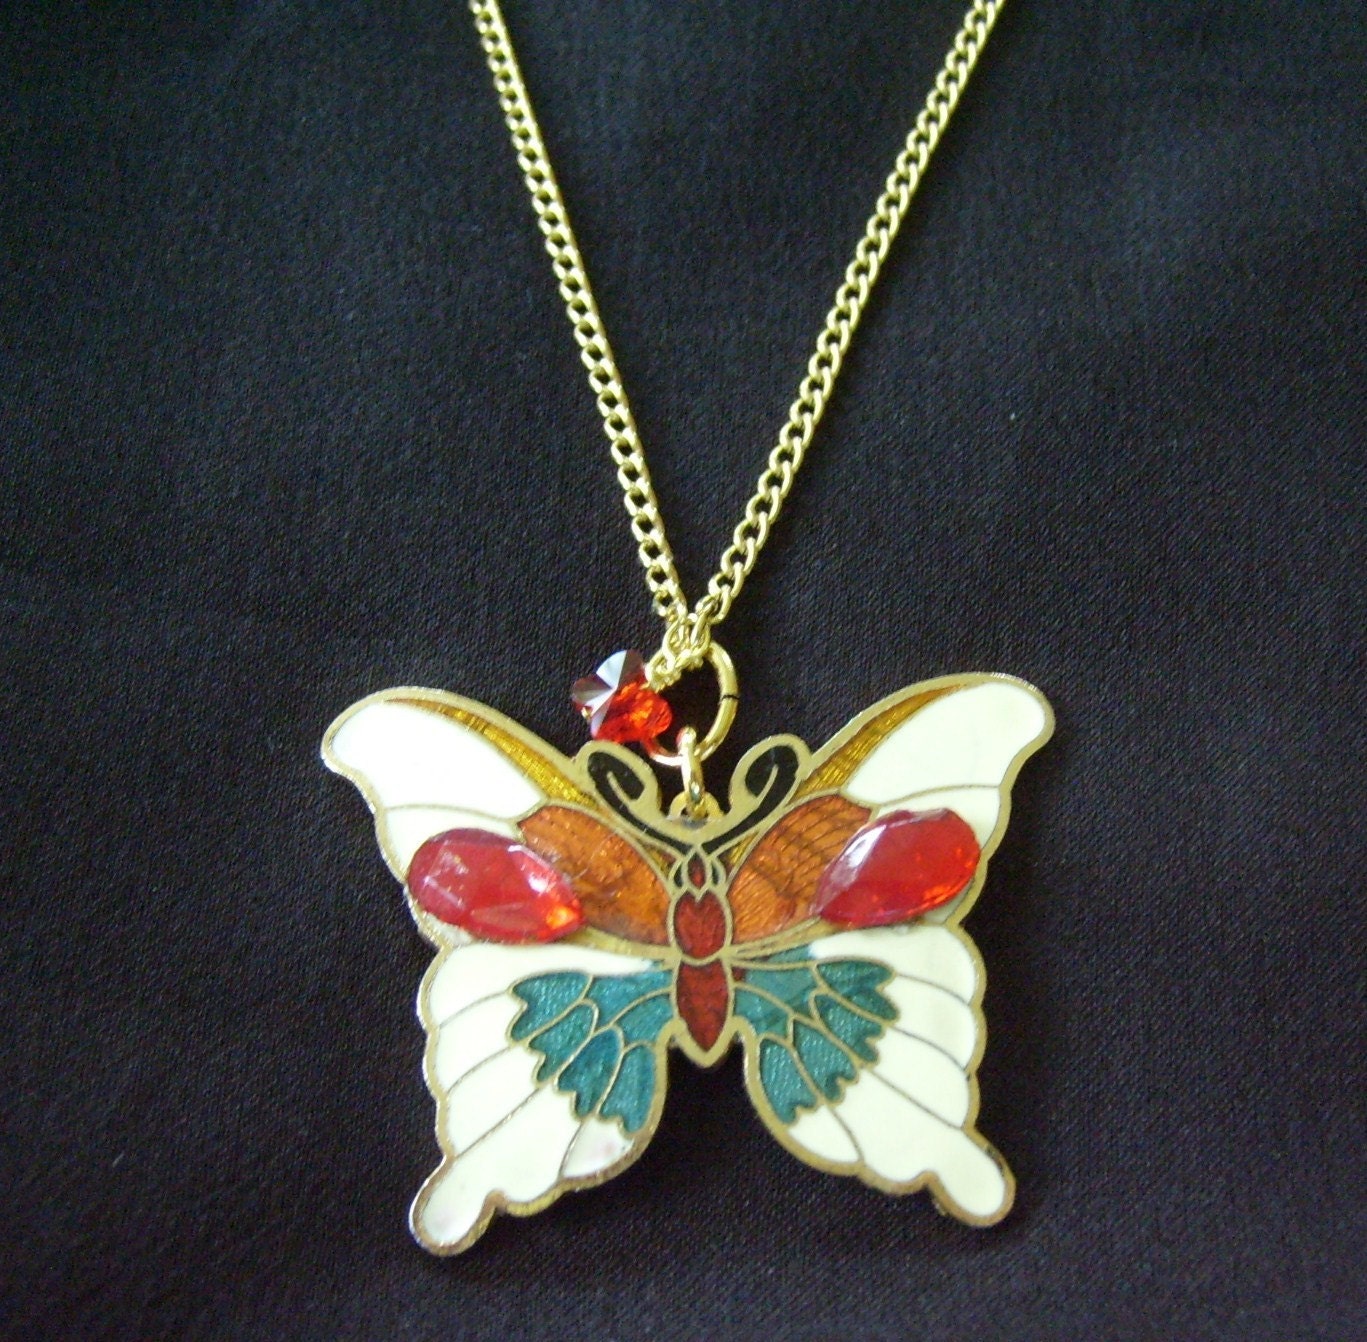 Vintage Butterfly Pendant Choker Necklace by LifeTravelsDesigns